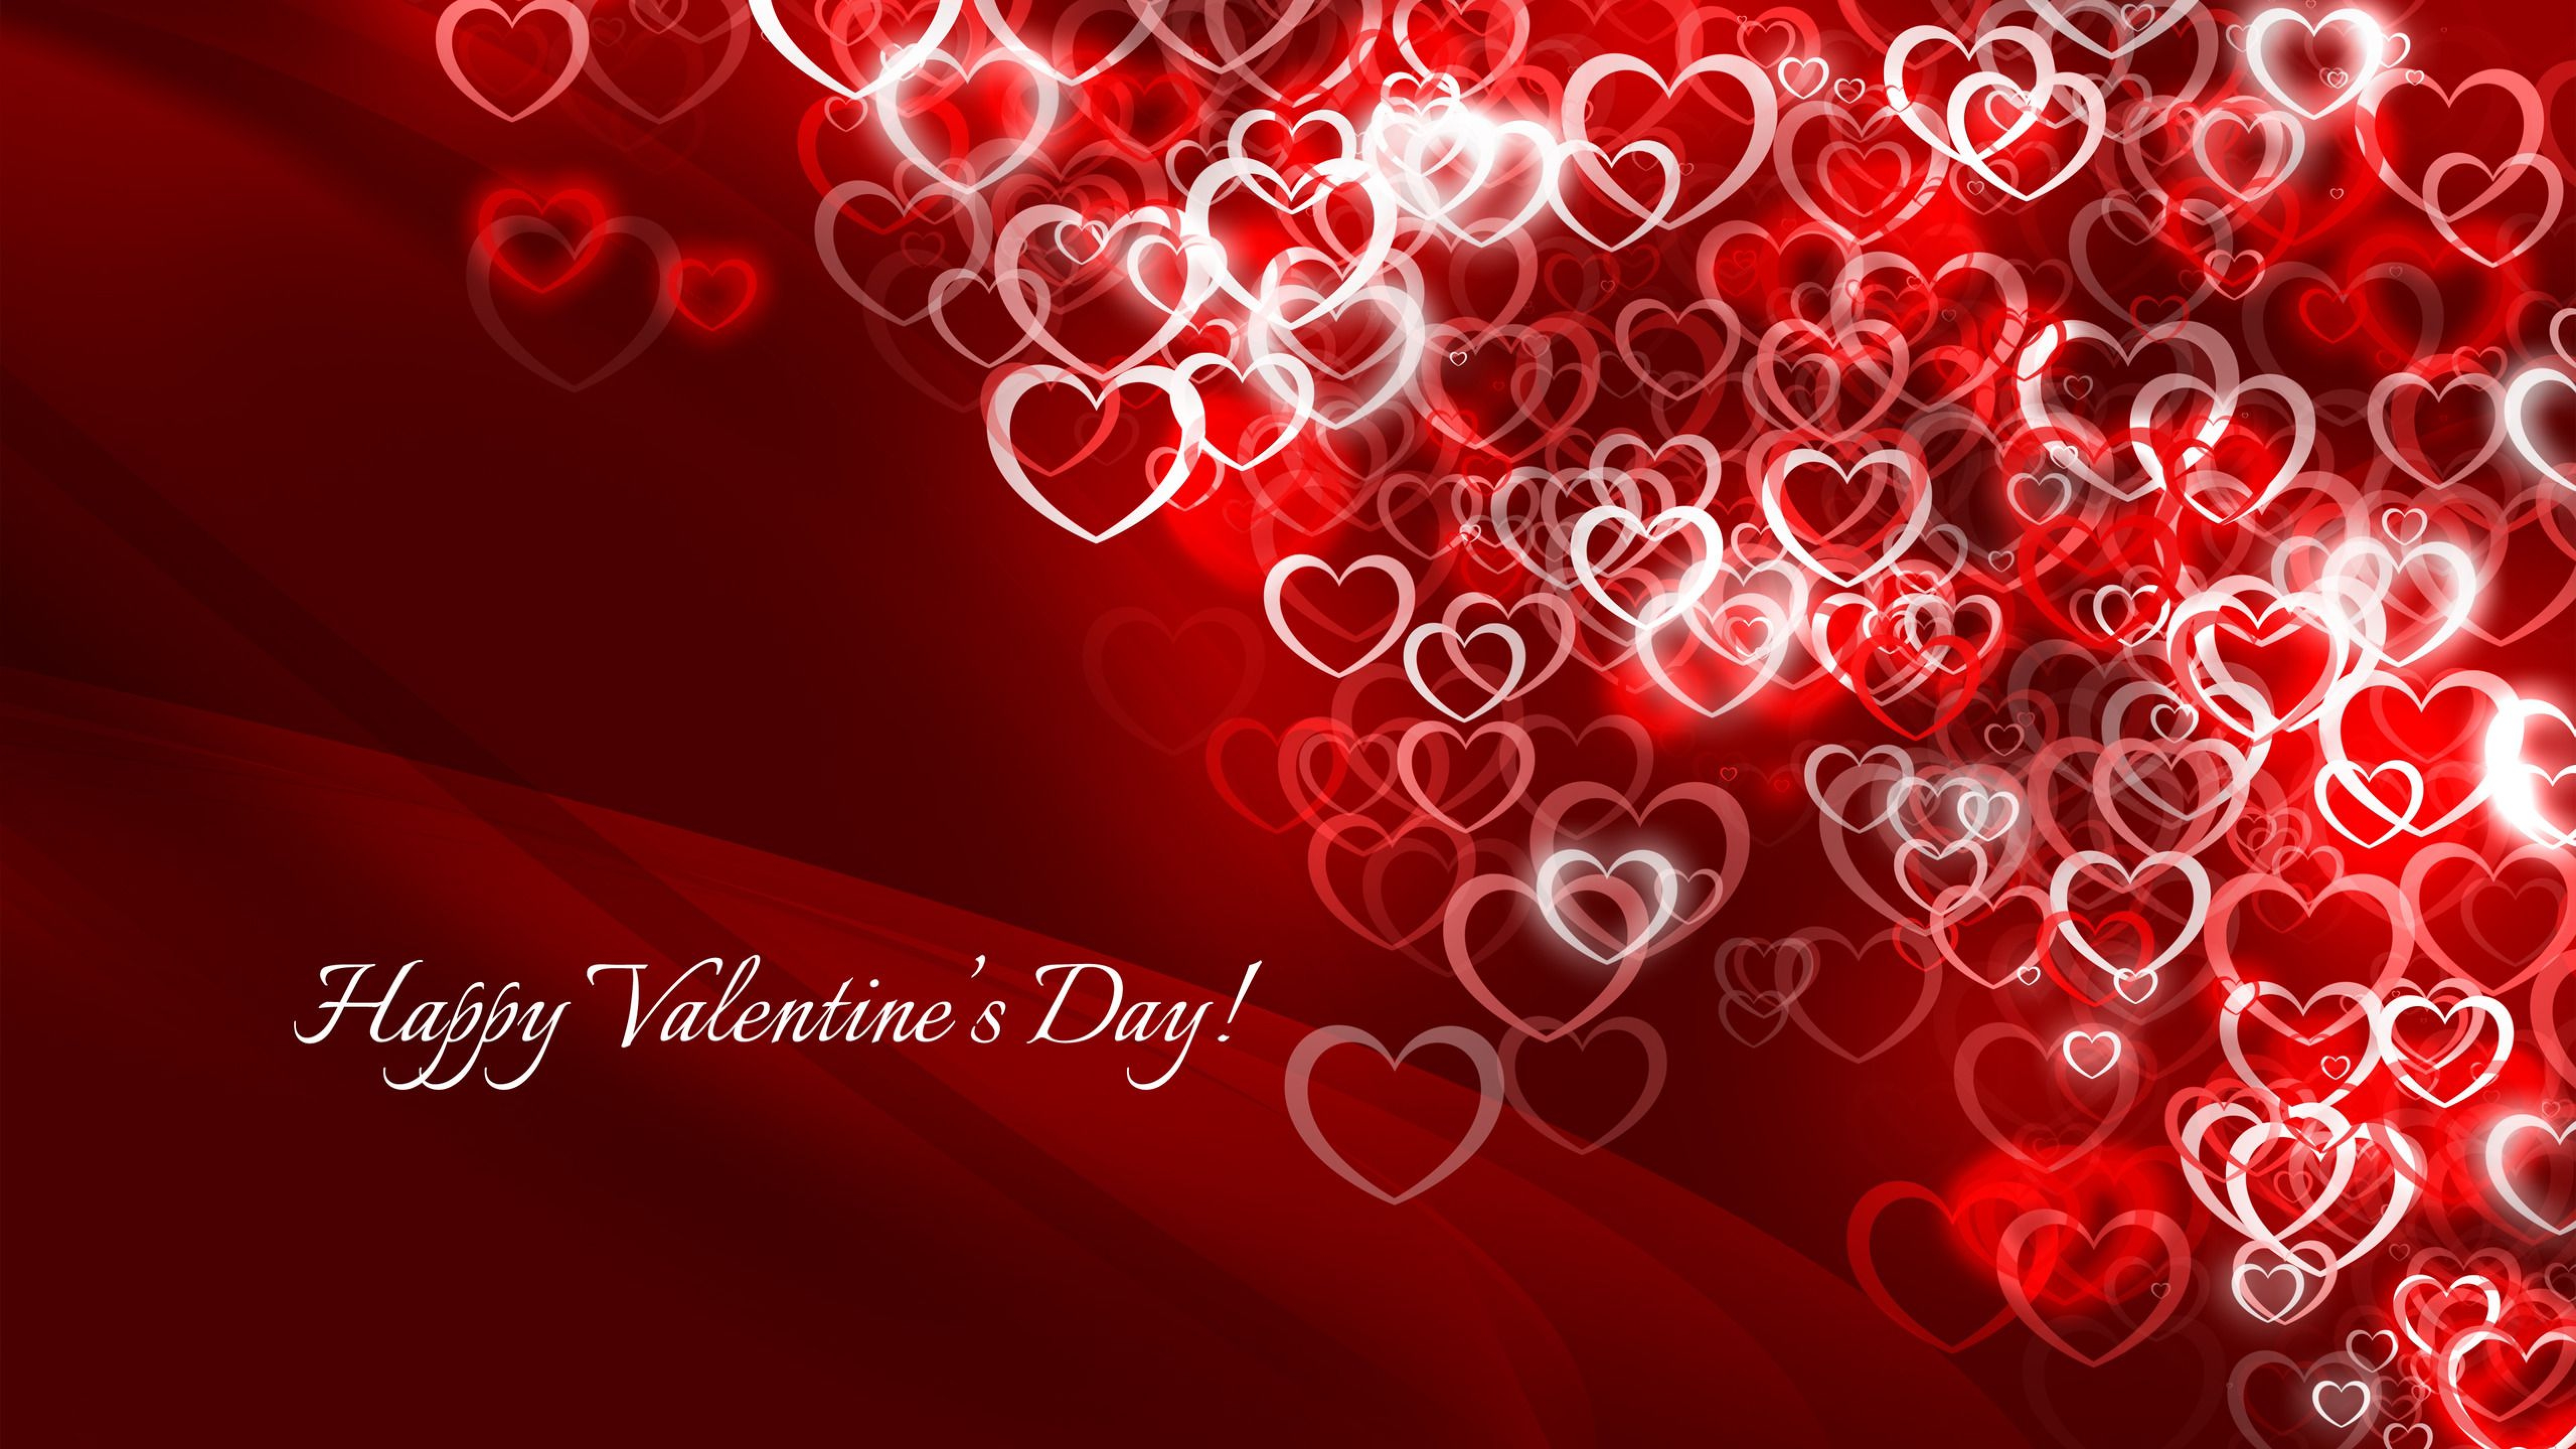 Image: Valentine's day, love, red background, hearts, loop